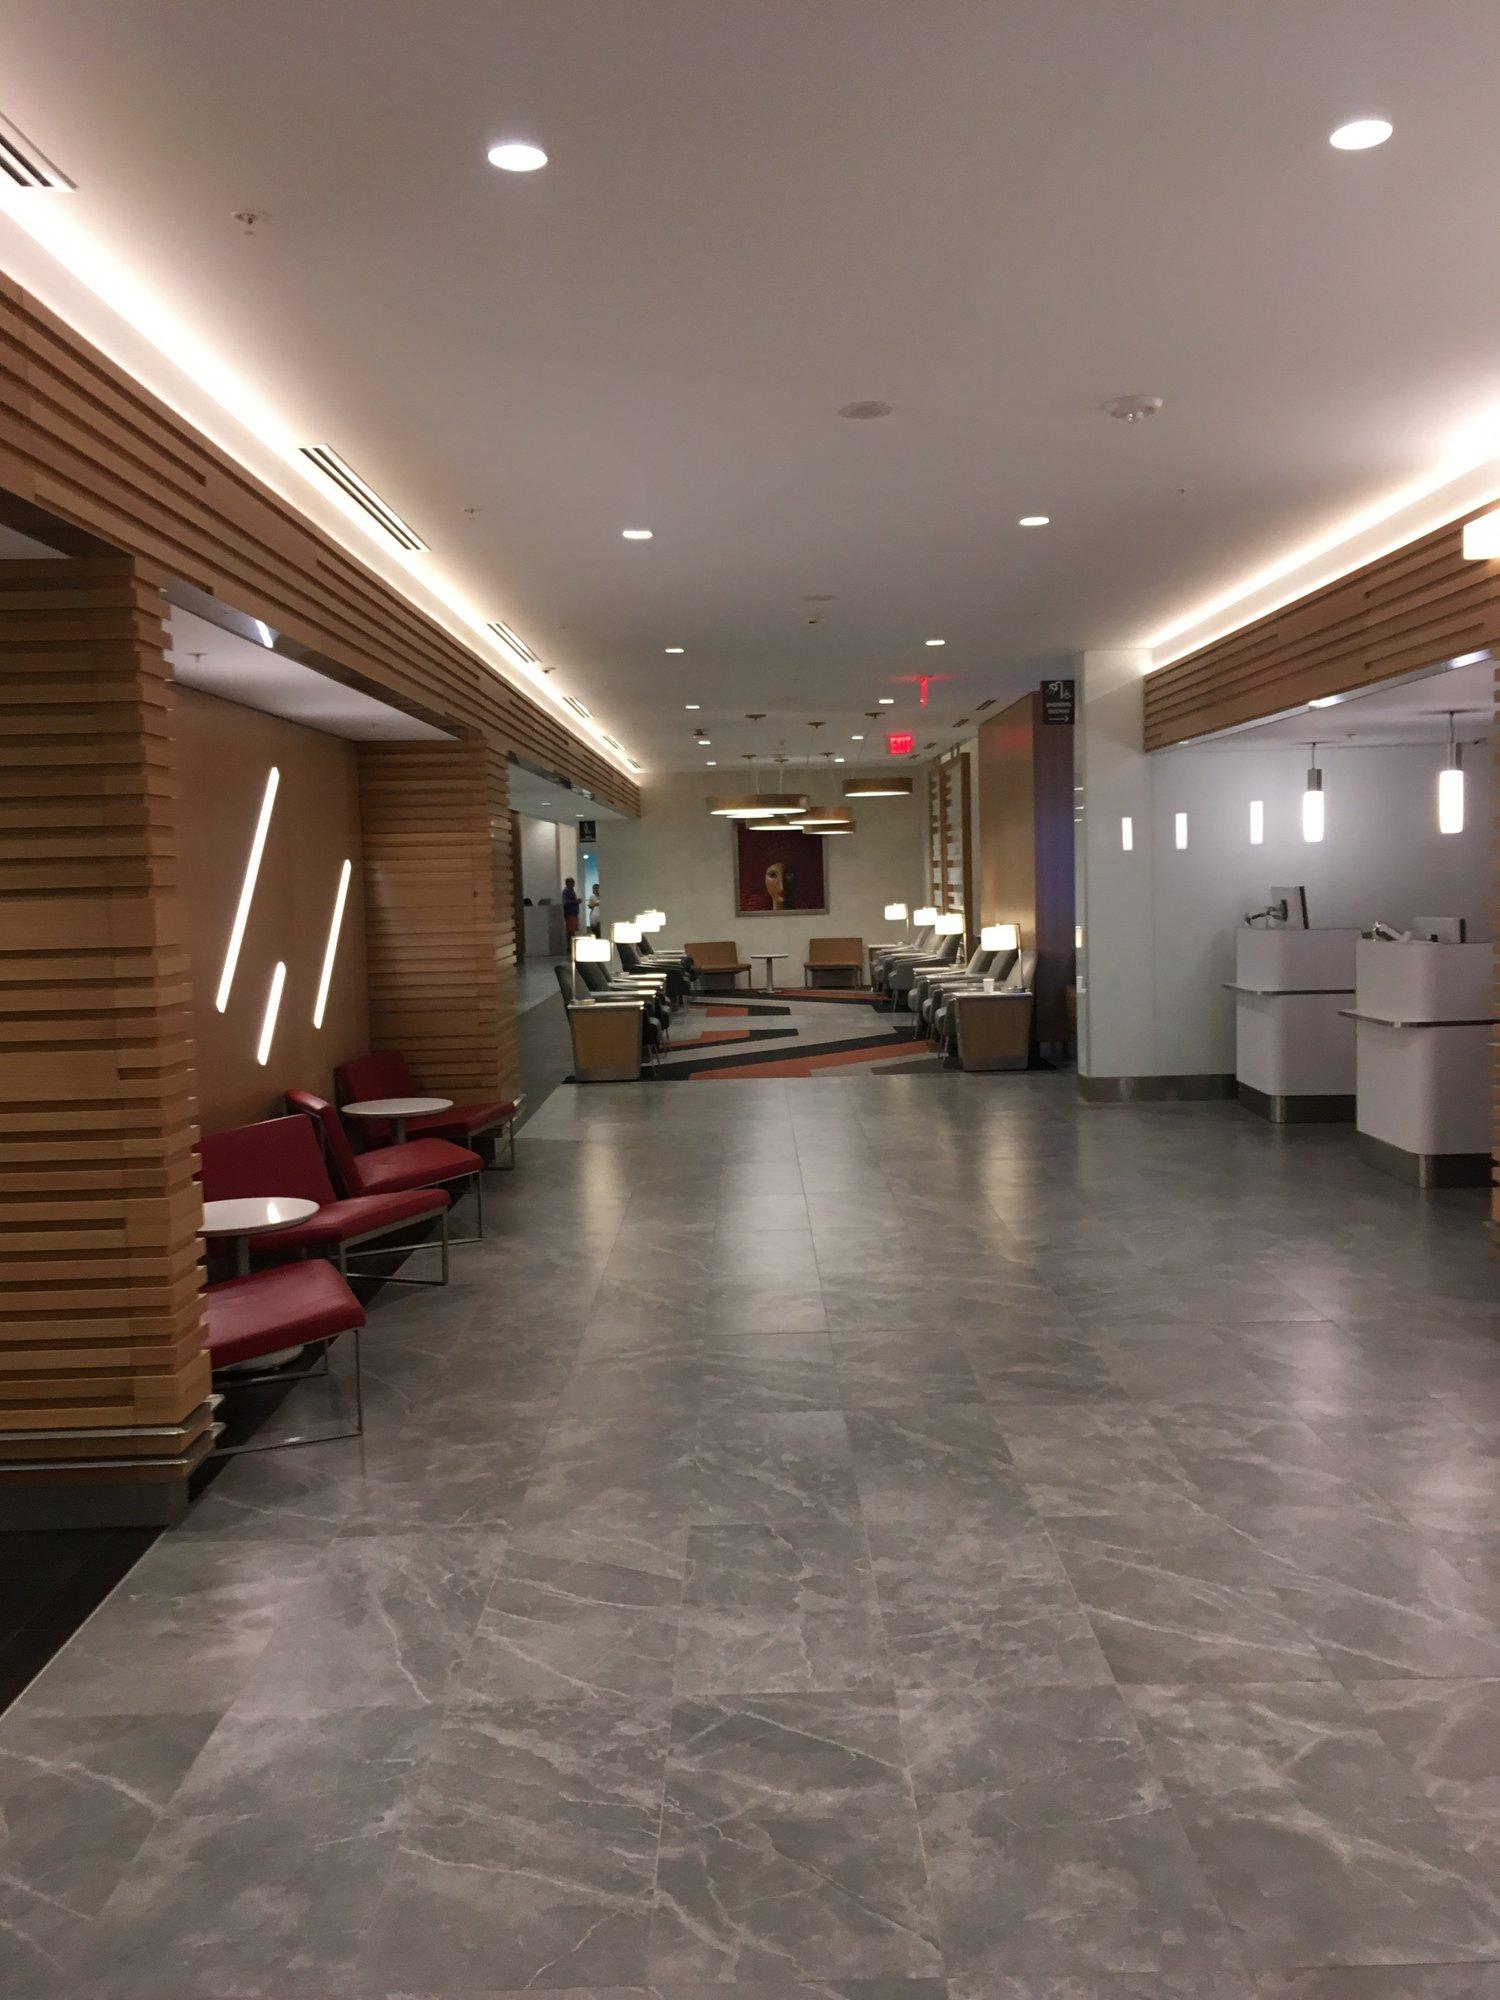 American Airlines Flagship Lounge image 50 of 65